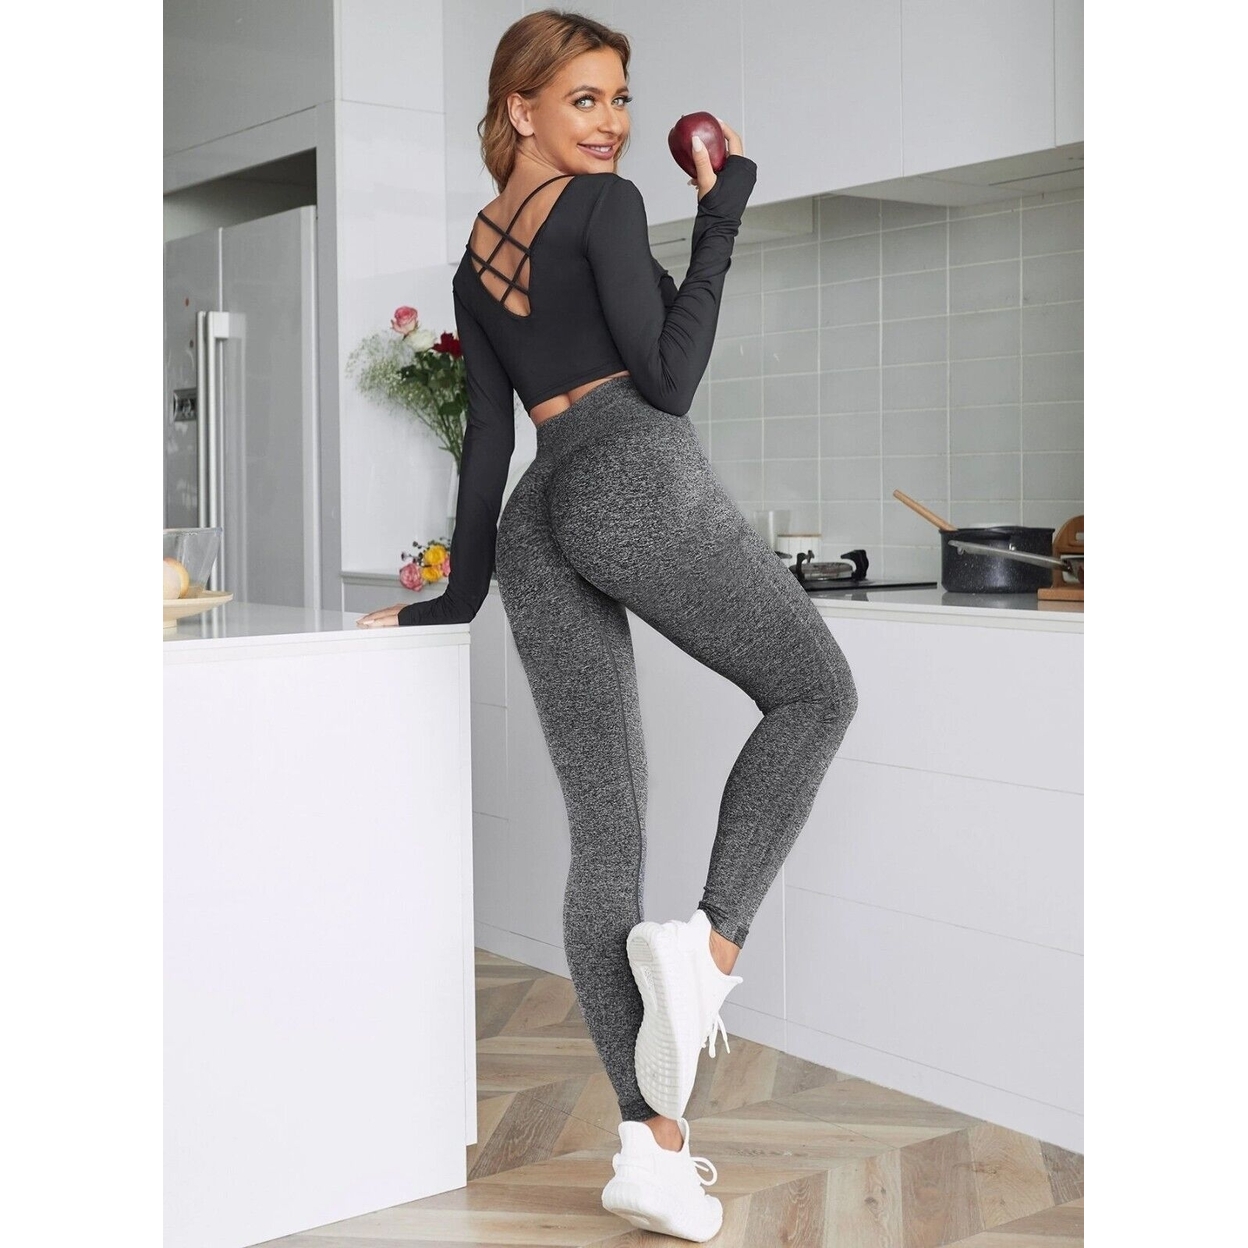 Women's Winter Warm Marled High Waist Fleece Lined Thick Thermal Leggings Pants - Charcoal, X-large